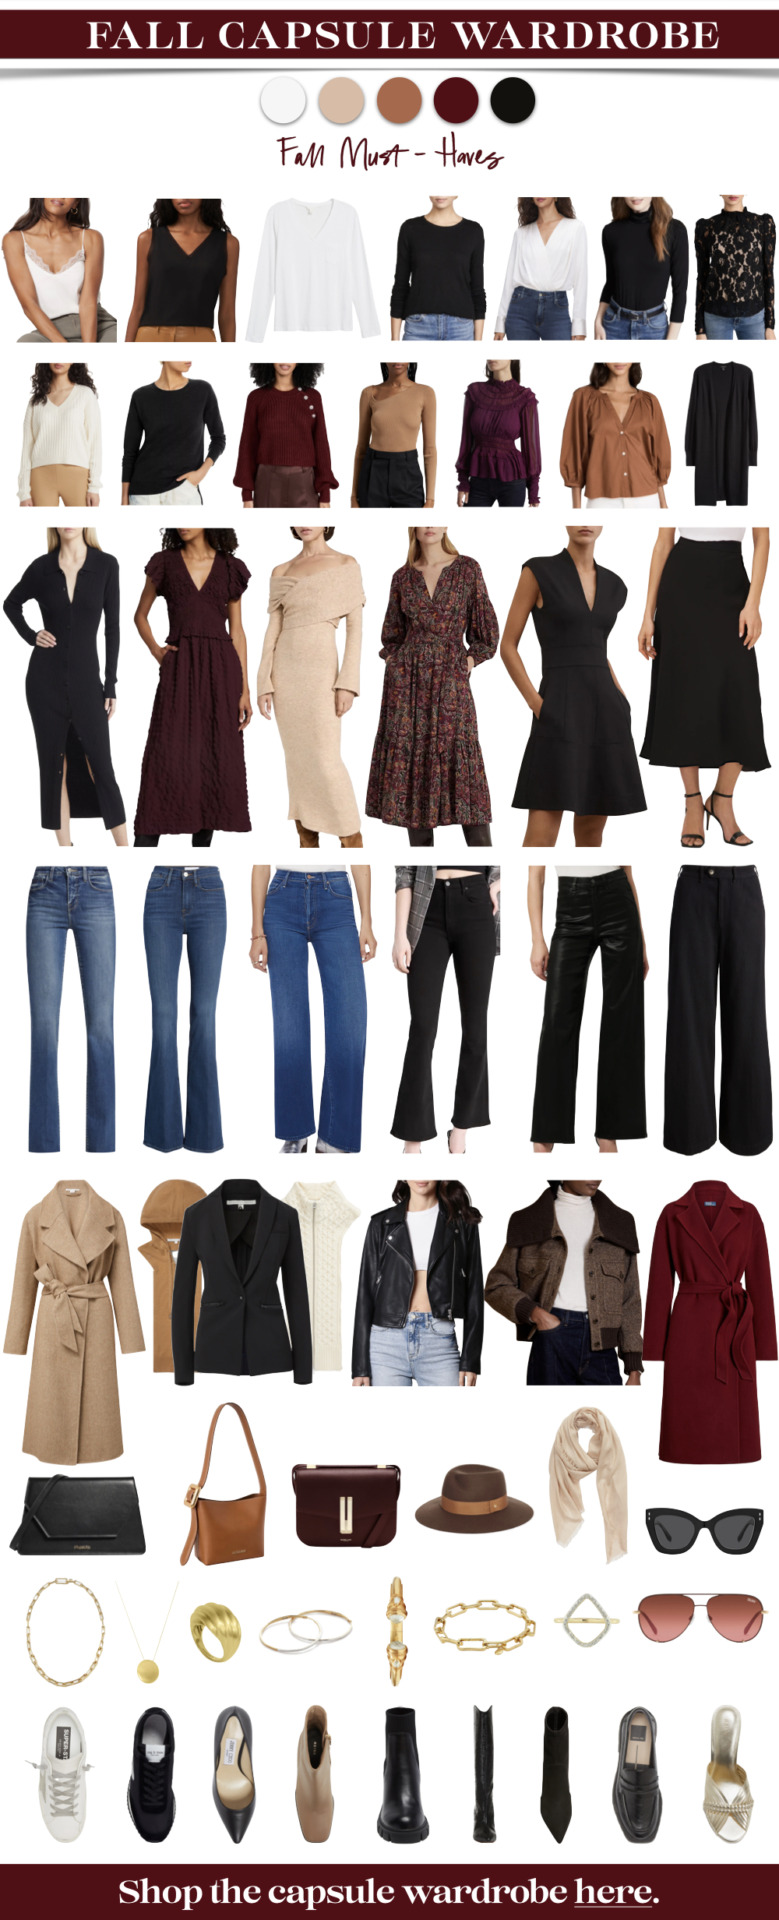 Snap Up A Maternity Capsule Wardrobe At The Shopbop Fall Event